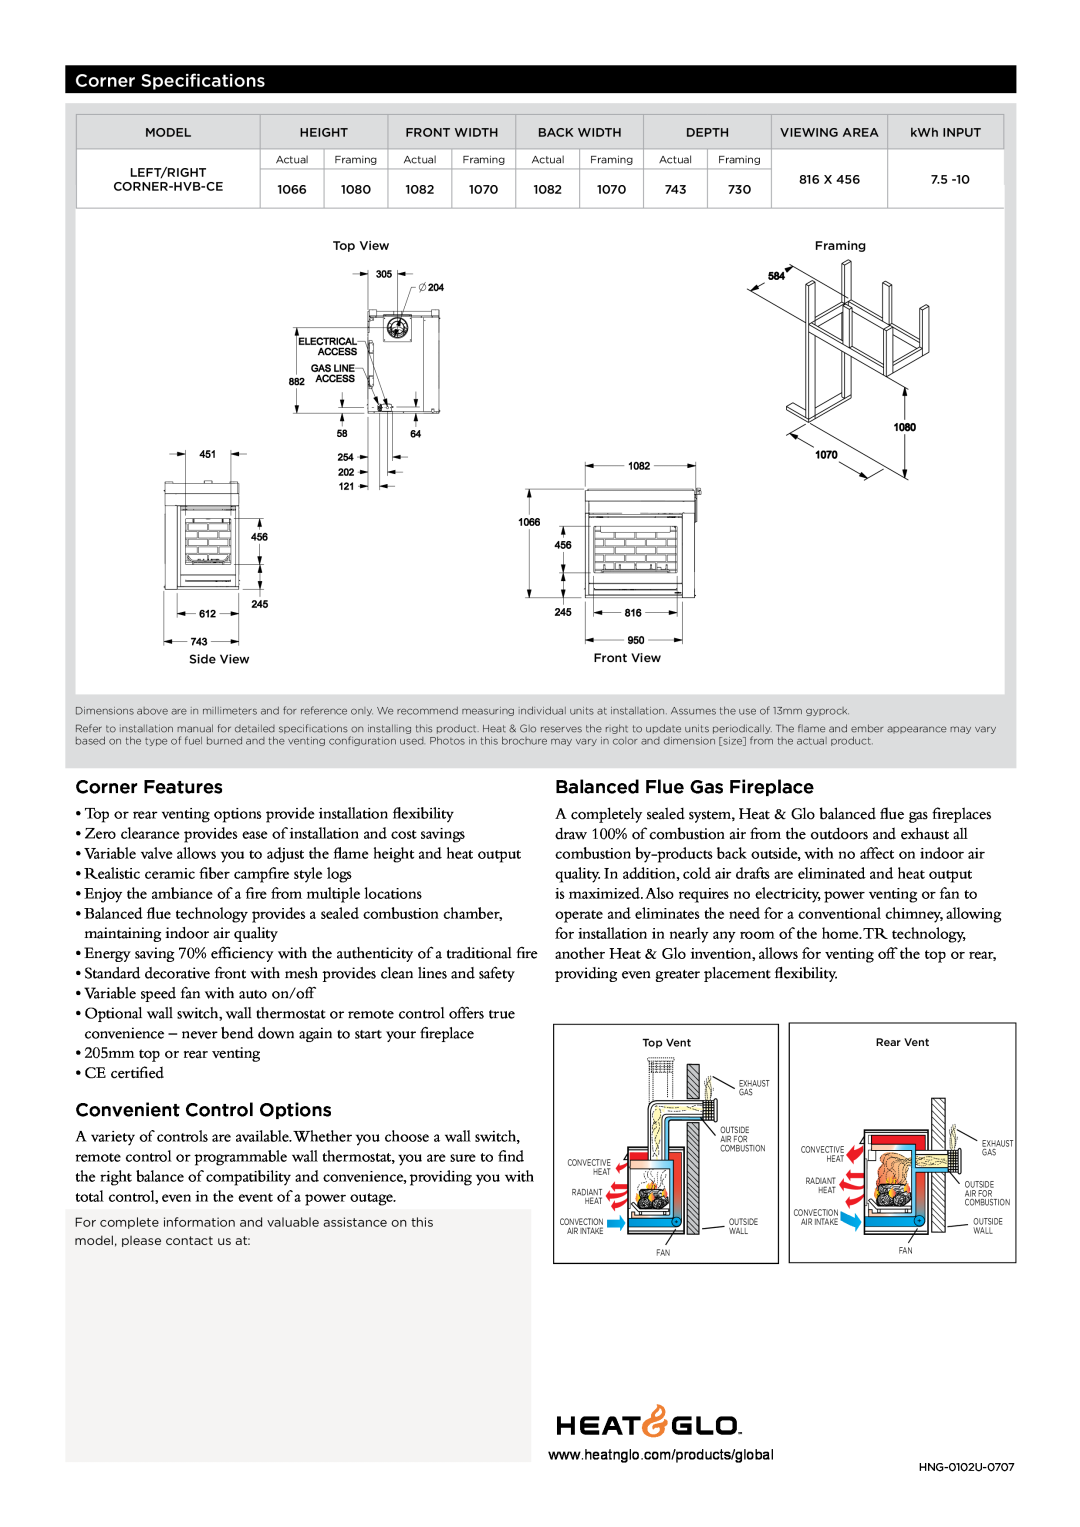 Hearth and Home Technologies CORNER-HVB-CE manual Corner Specifications, Corner Features, Balanced Flue Gas Fireplace 